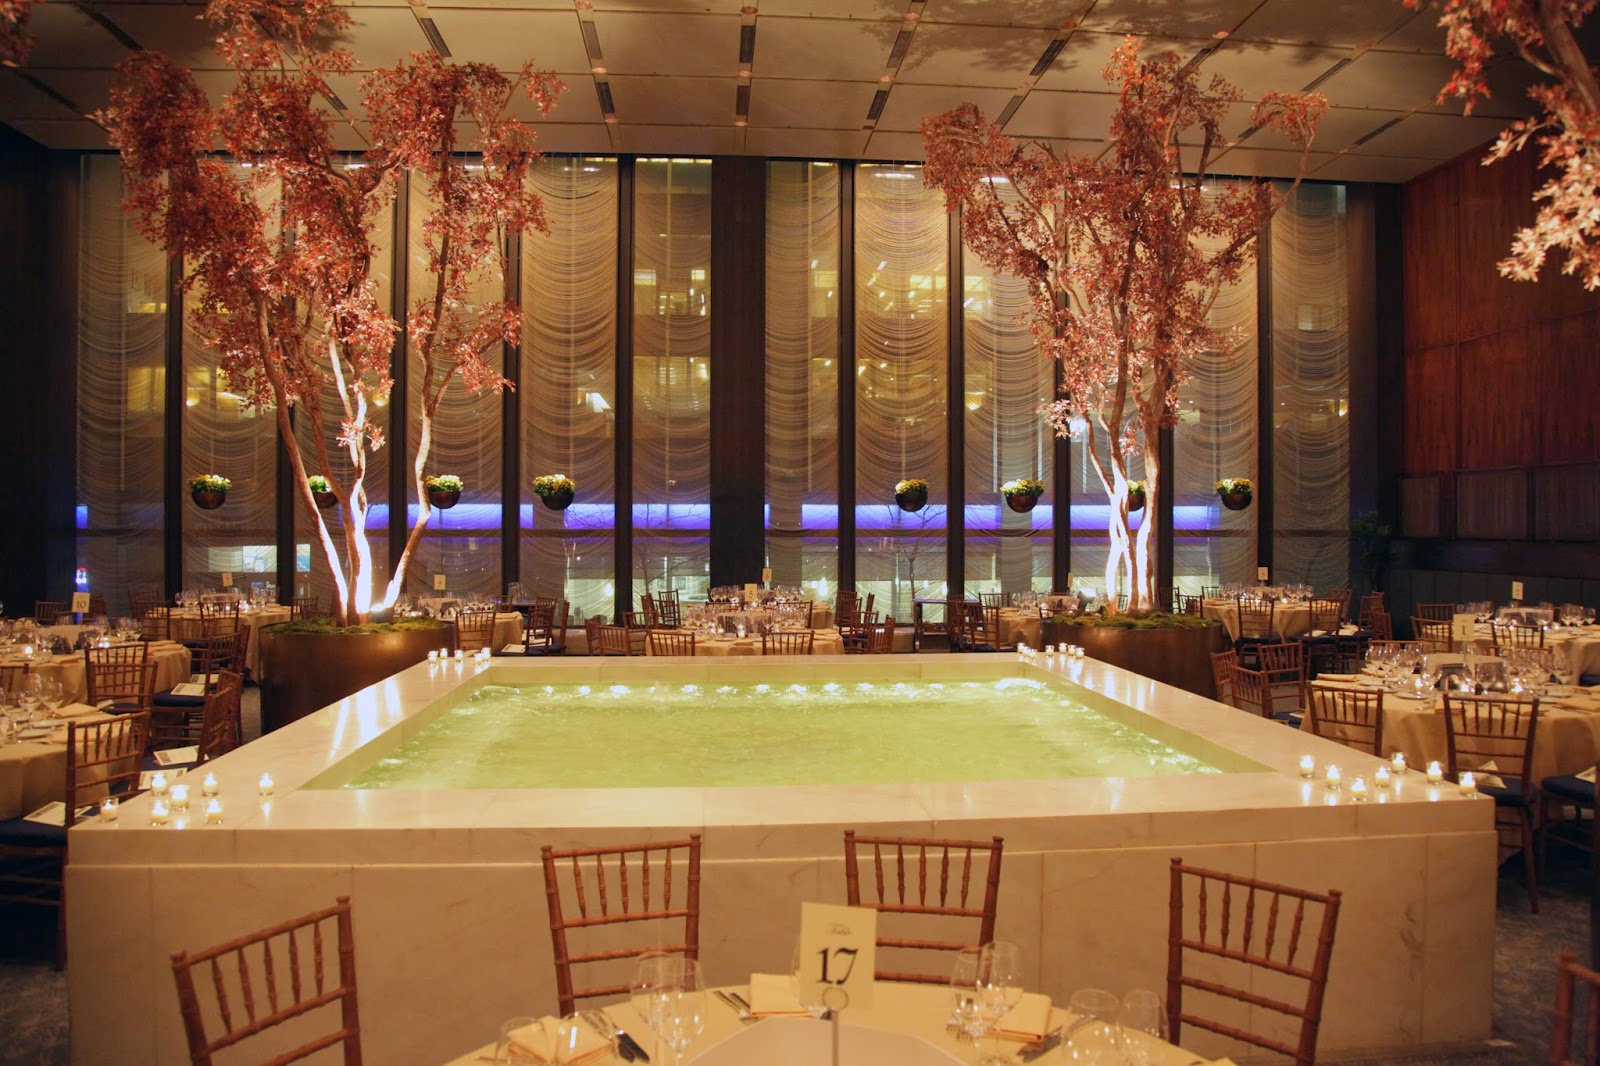 Passion For Luxury : 10 most beautiful restaurants in the world